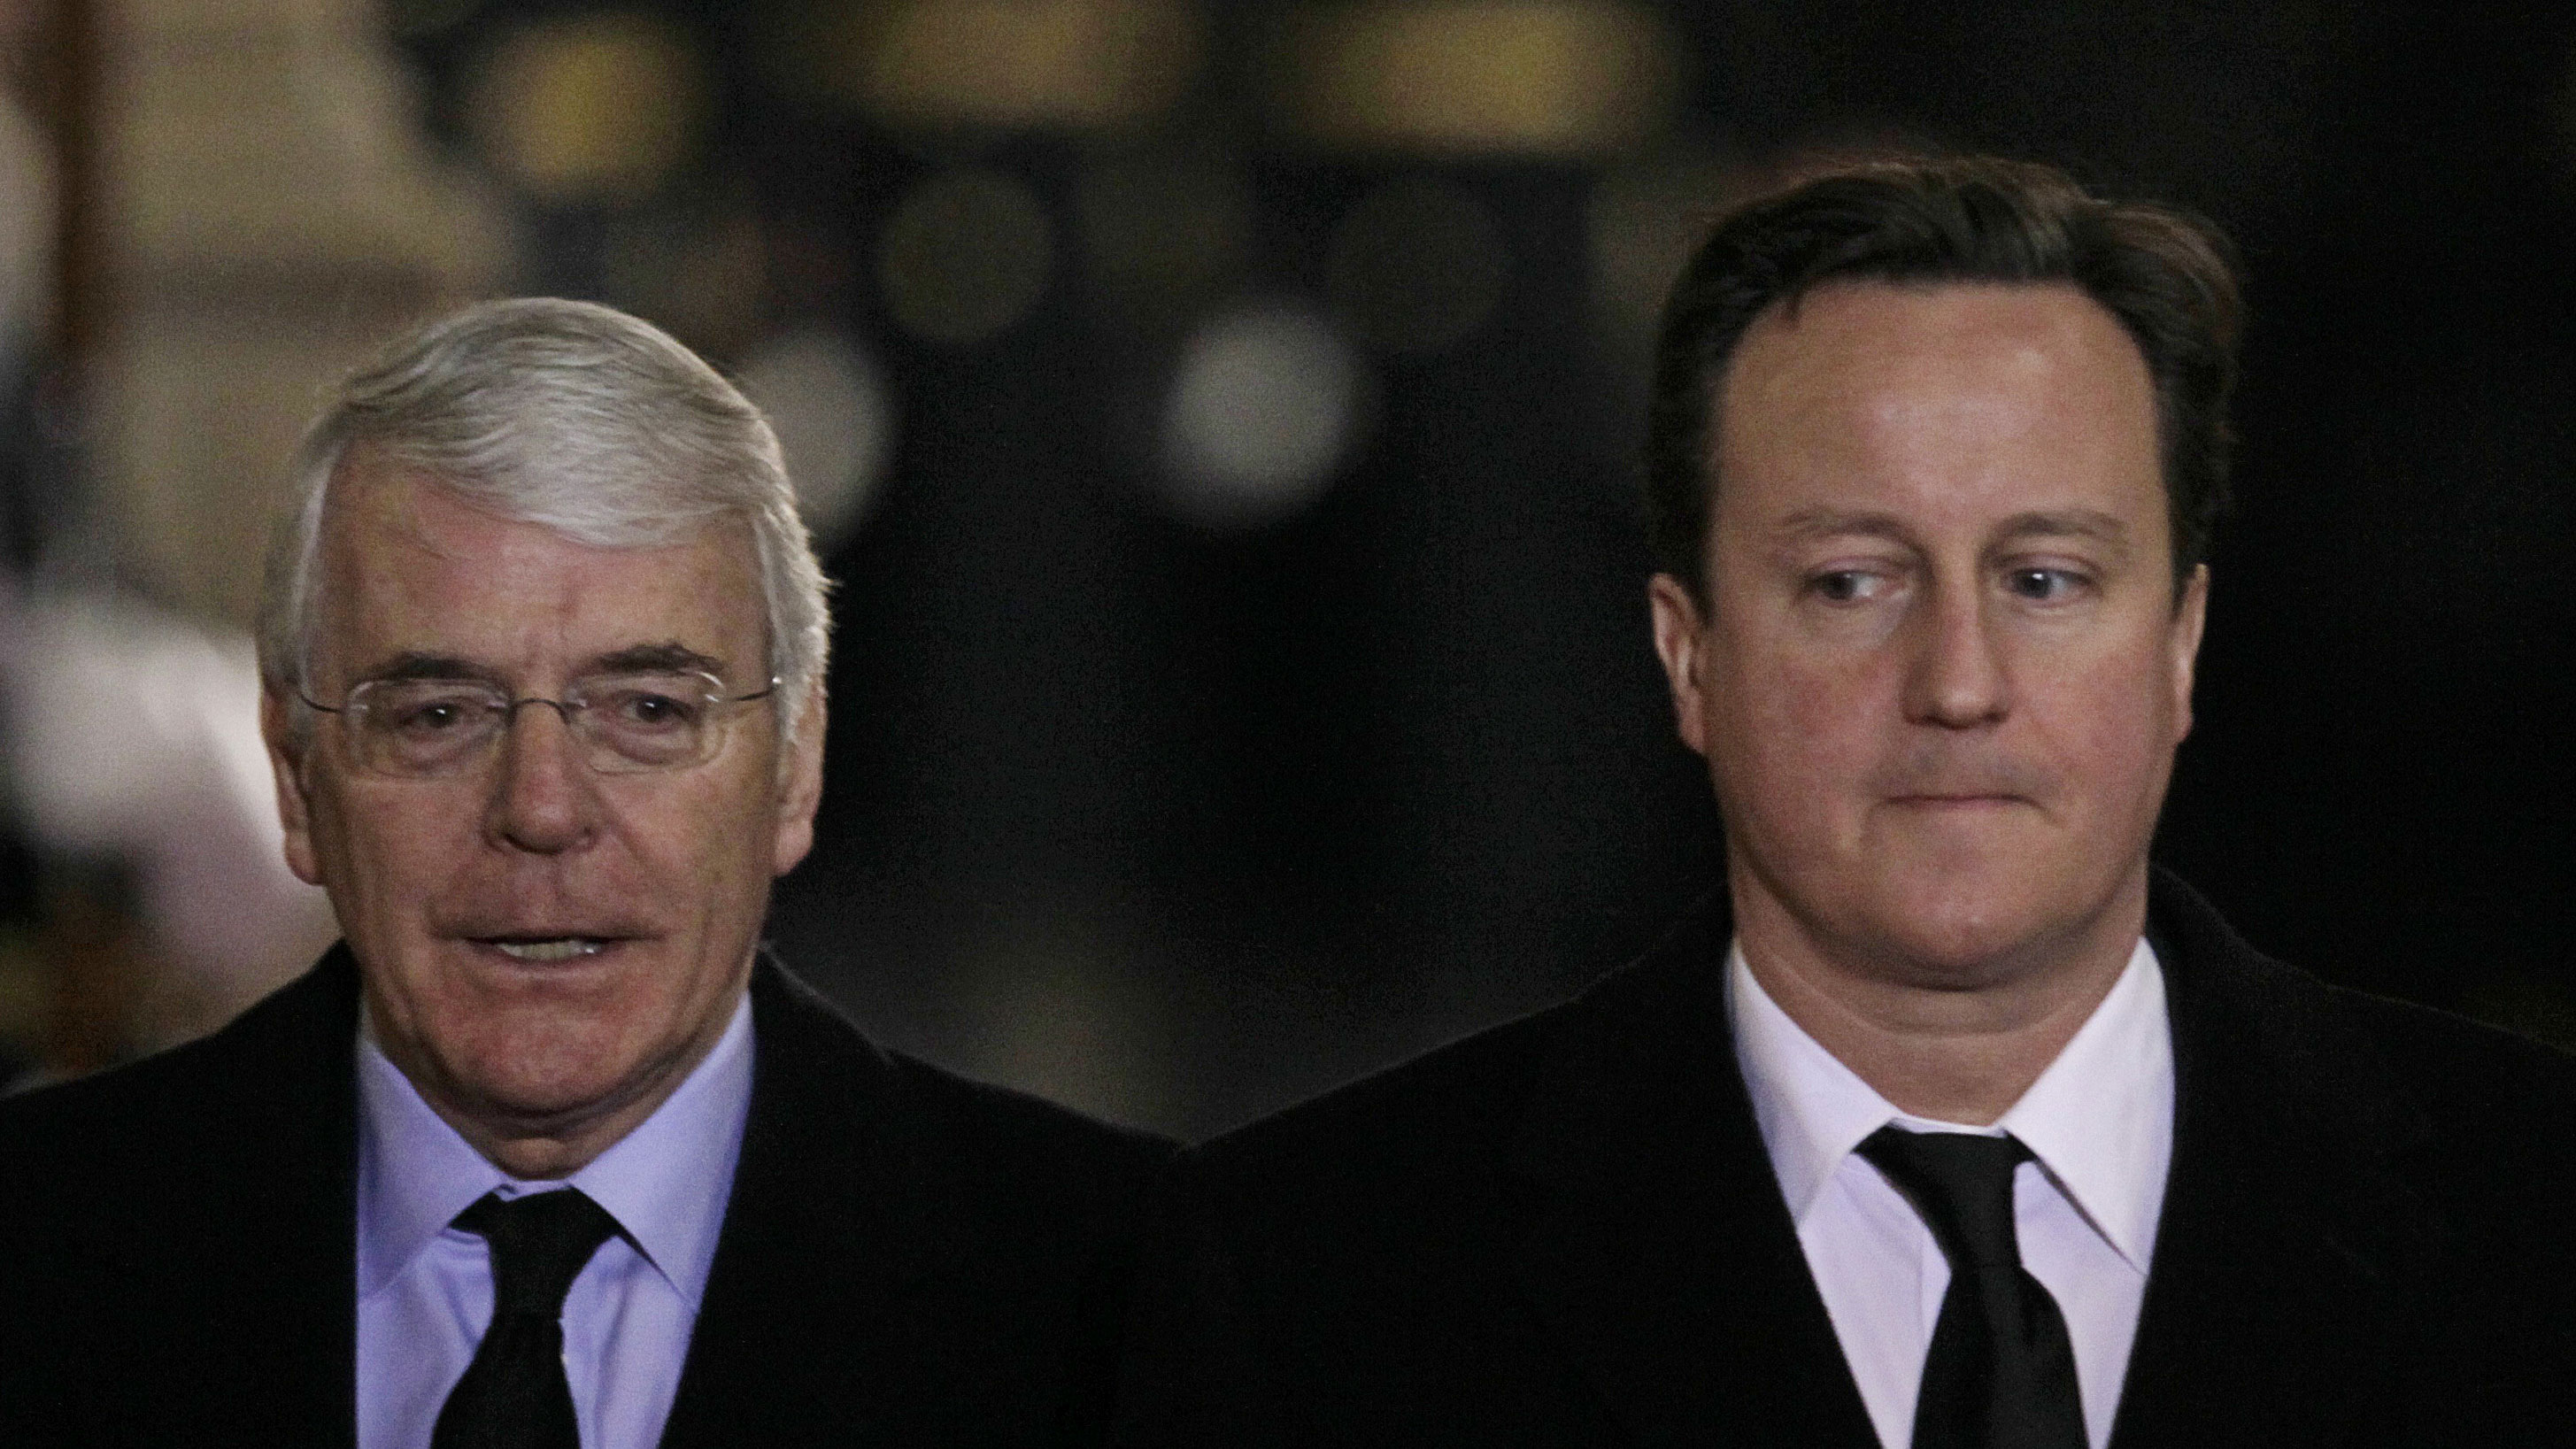 Former prime minister John Major throws support behind David Cameron's plan to allow same-sex marriage in religious settings such as churches, joining high-profile Tories Boris Johnson and Gove